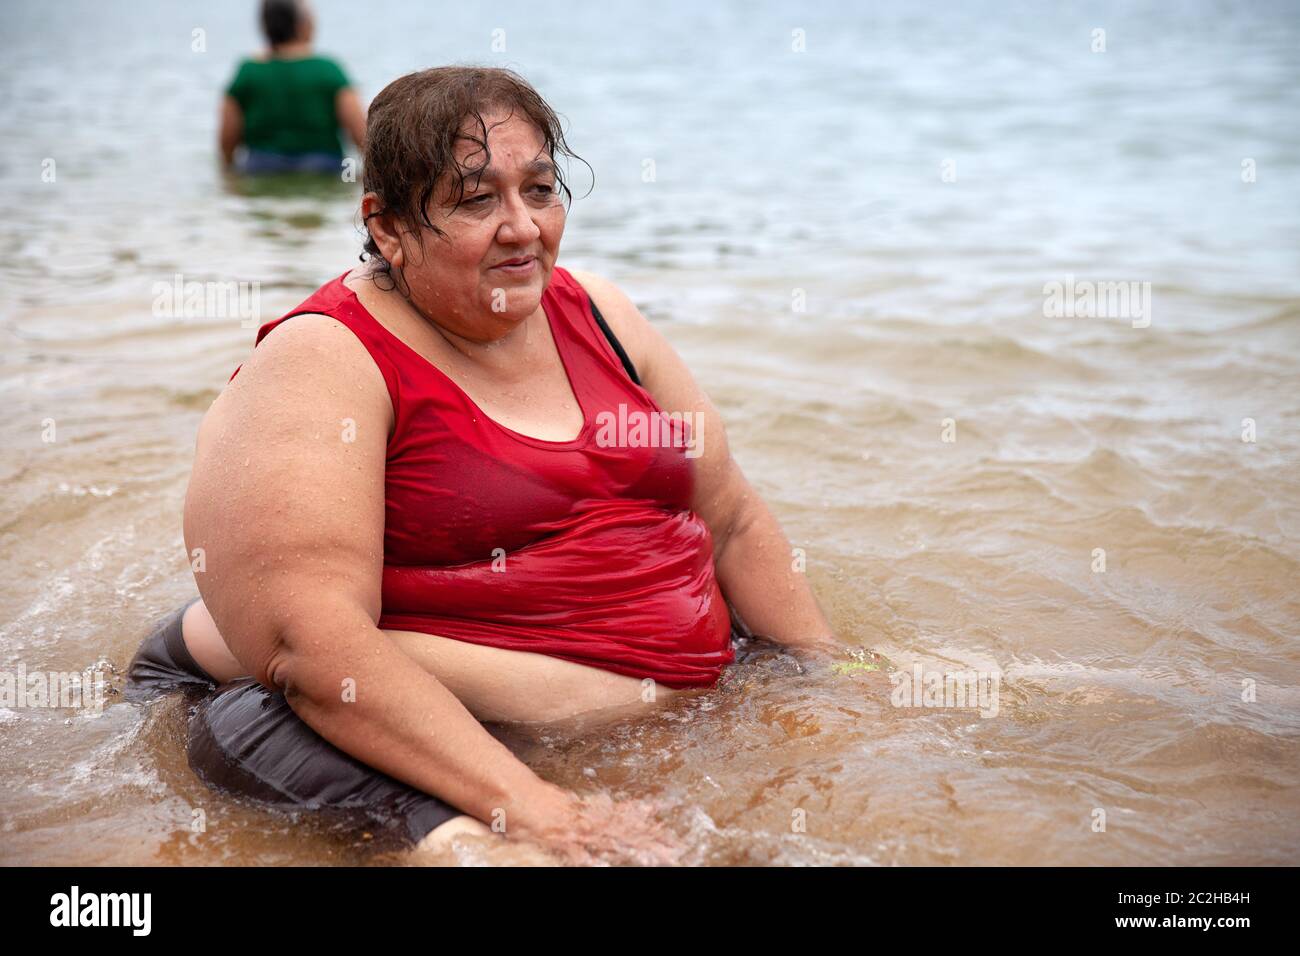 Marbella sits on the beach in Acapulco, Mexico on September 6, 2013. Marbella Aguilar Sosa is a 57-year-old Mexican woman with morbid obesity. She suf Stock Photo